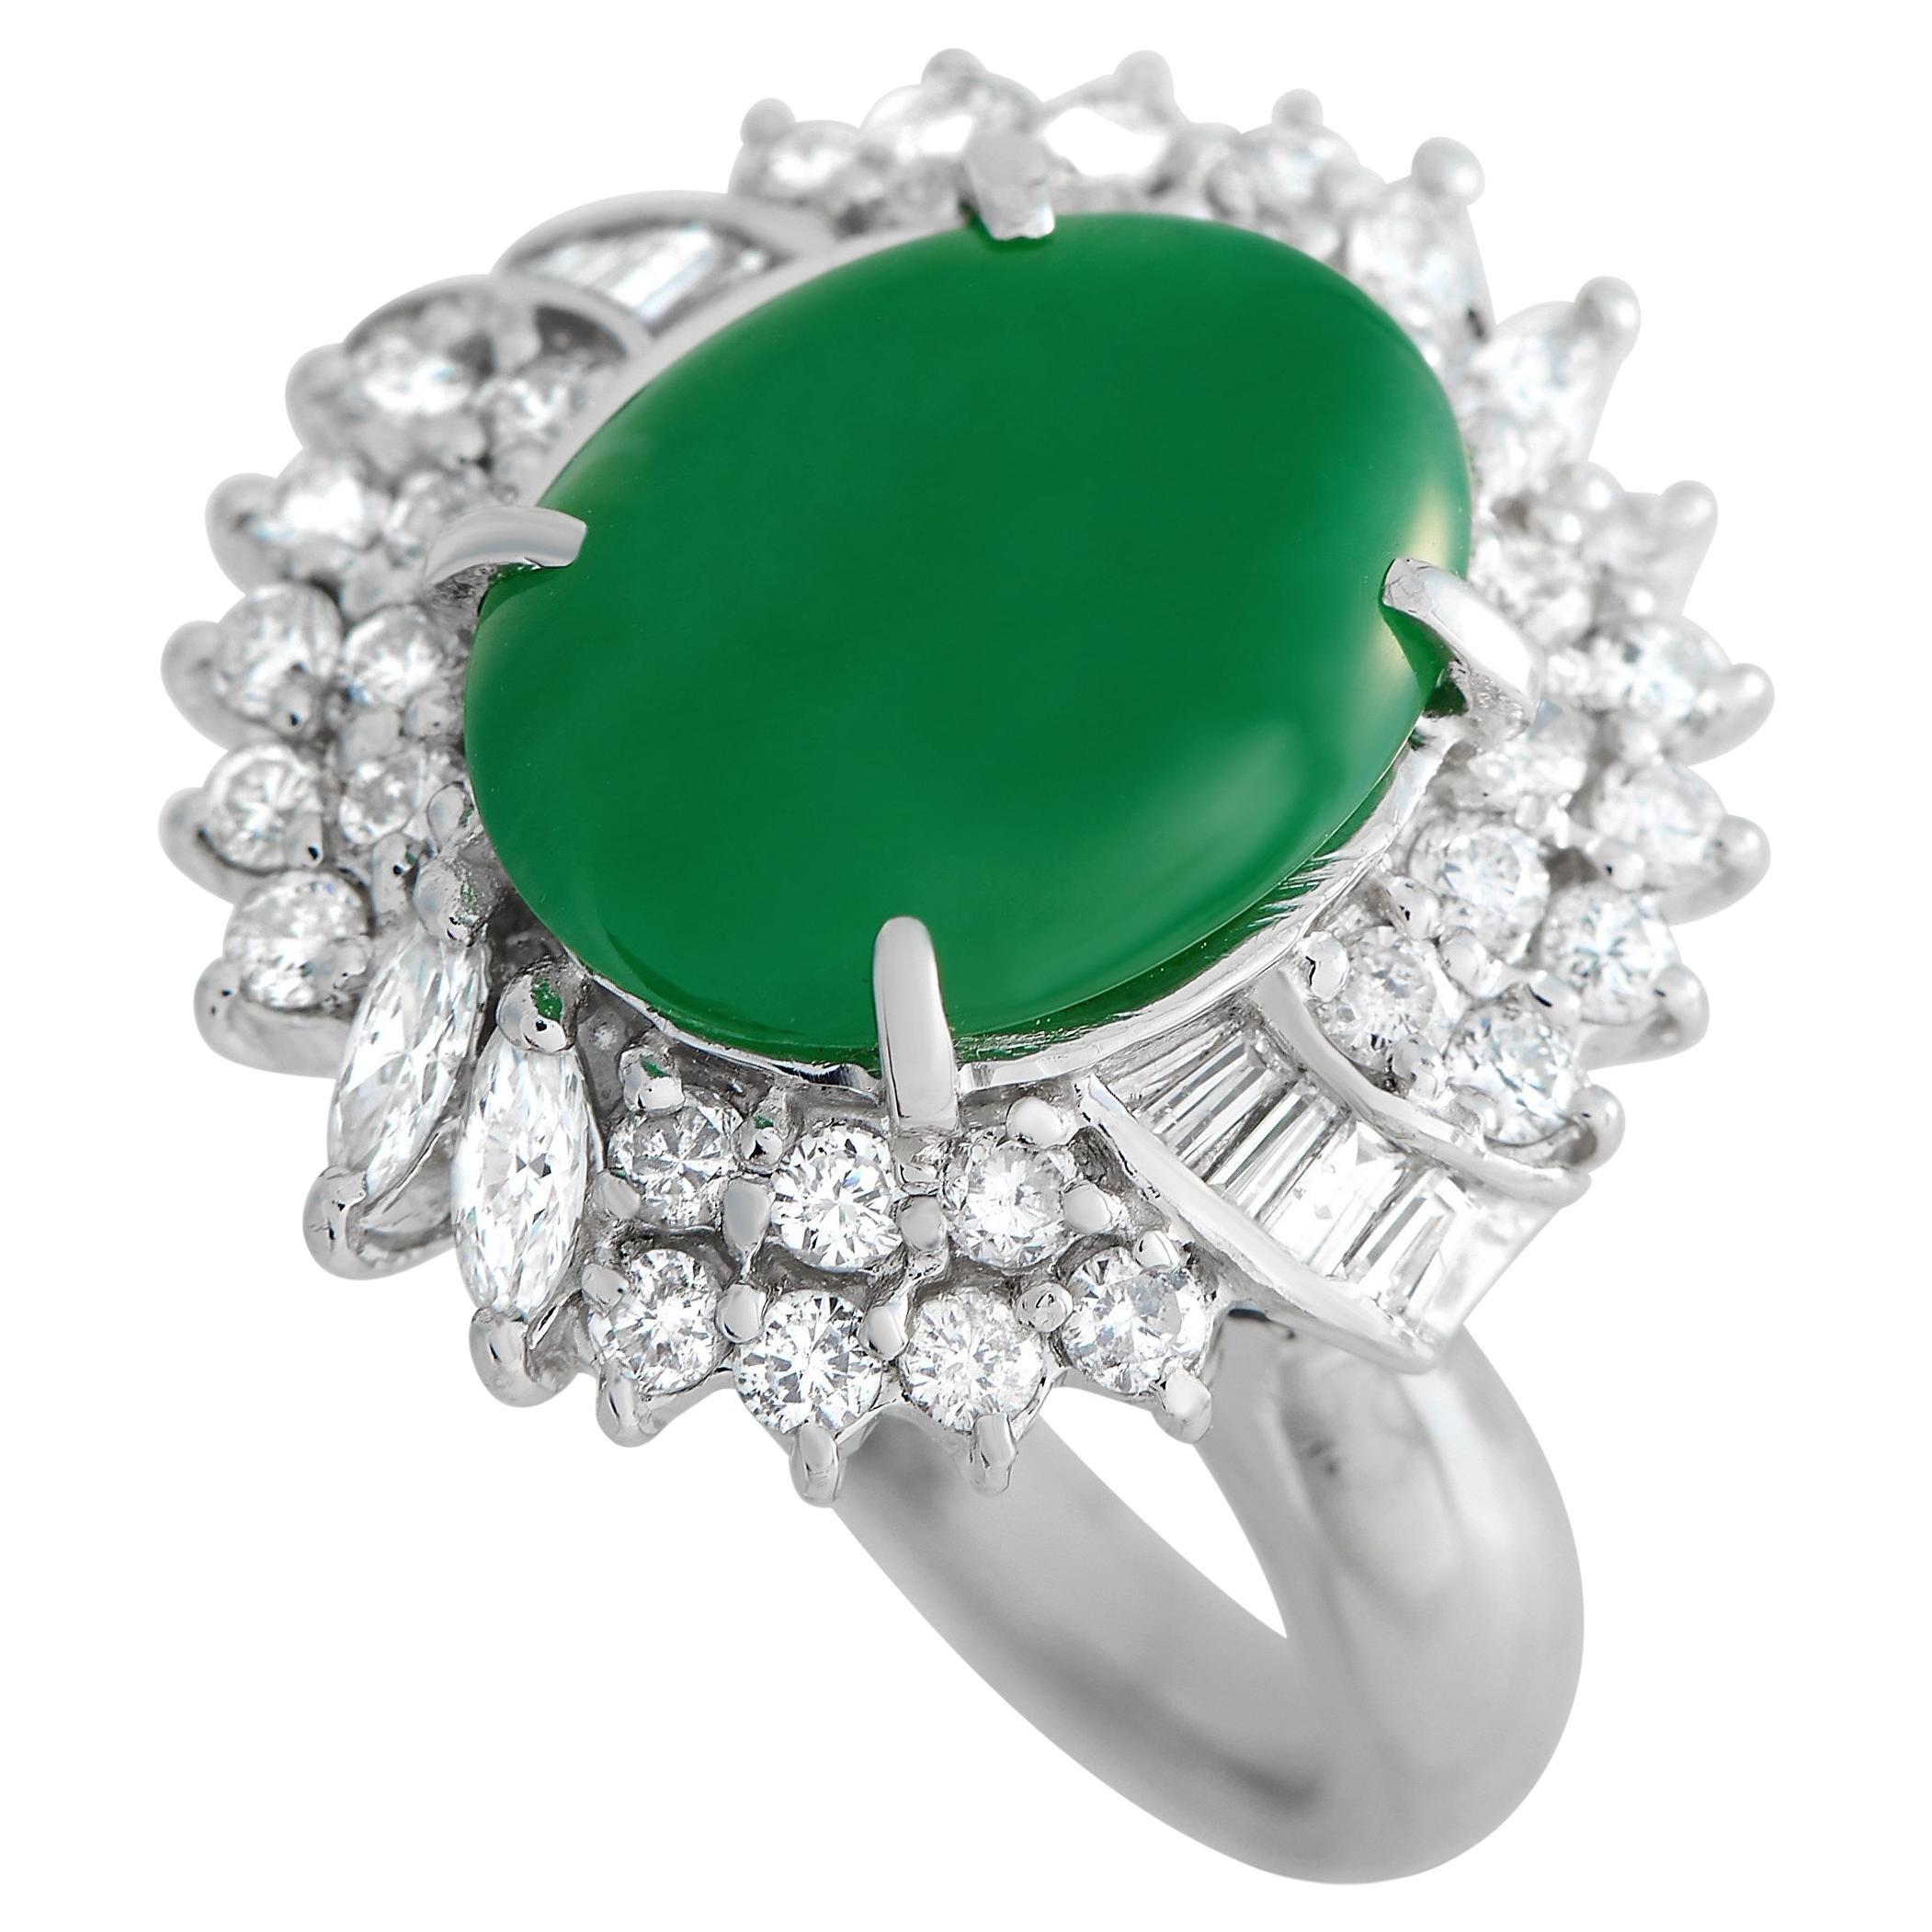 LB Exclusive Platinum 1.90 ct Diamond and Jade Ring For Sale